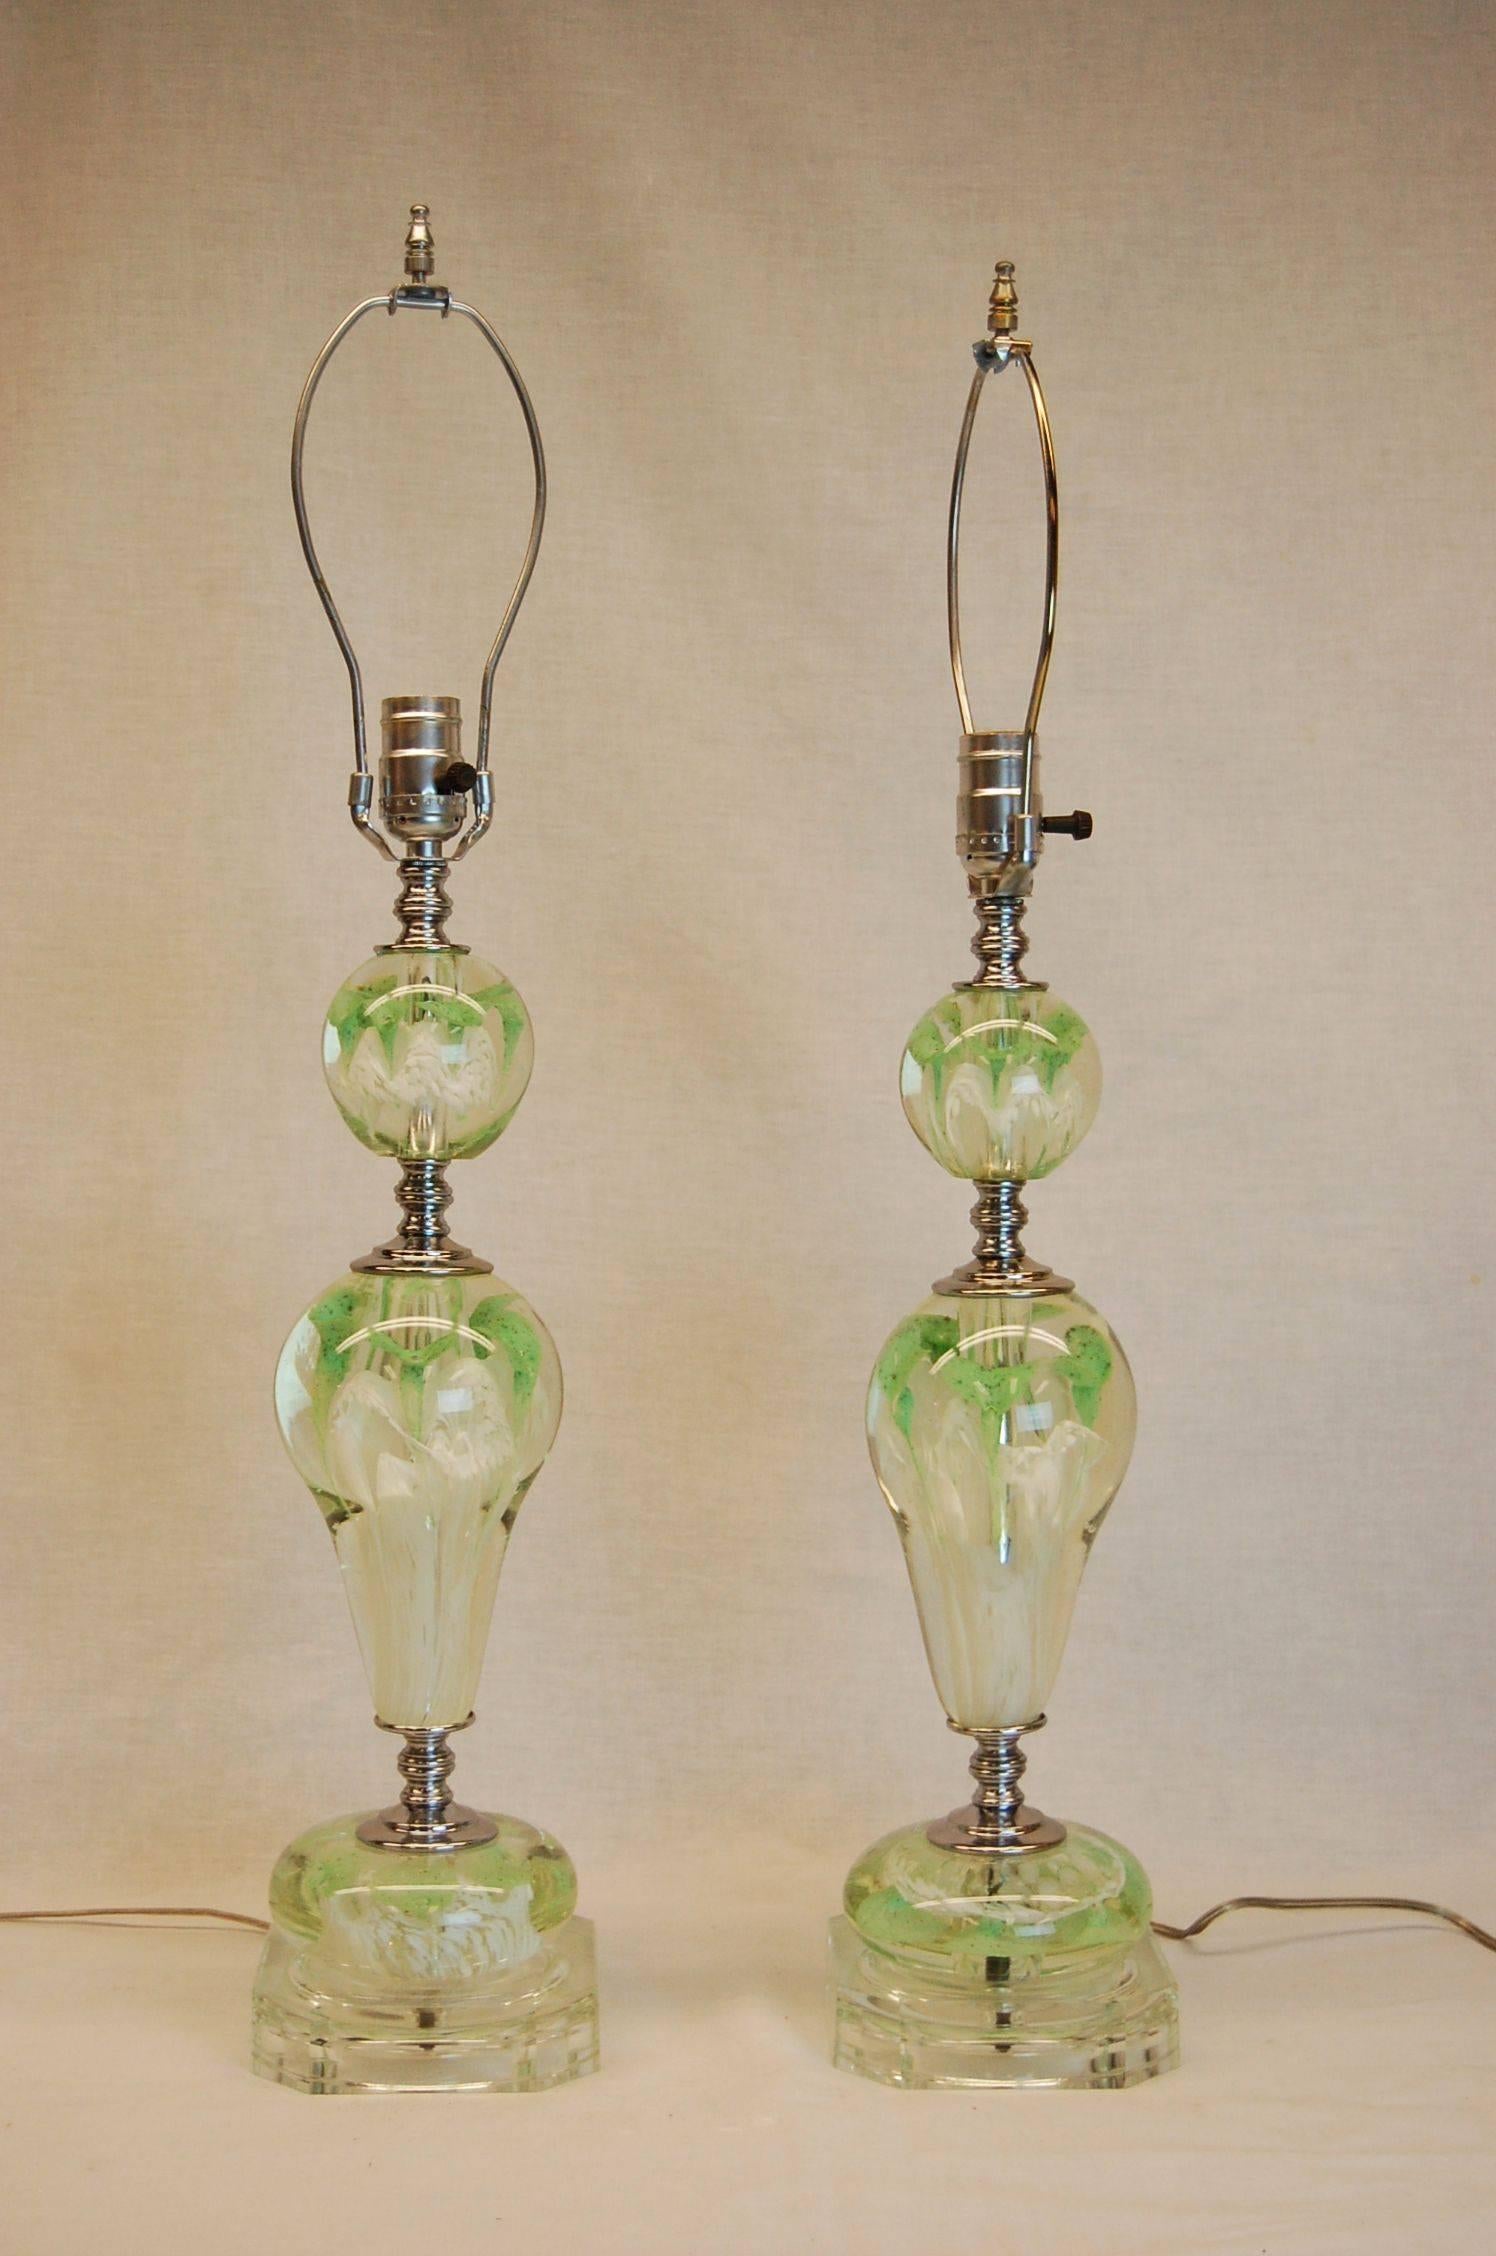 Pair of mint condition glass lamps with green and white floral paper weight art glass balls. The pair of shades were custom-made silk and have special rushing trim top and bottom. Possibly St. Clair Glass Co.